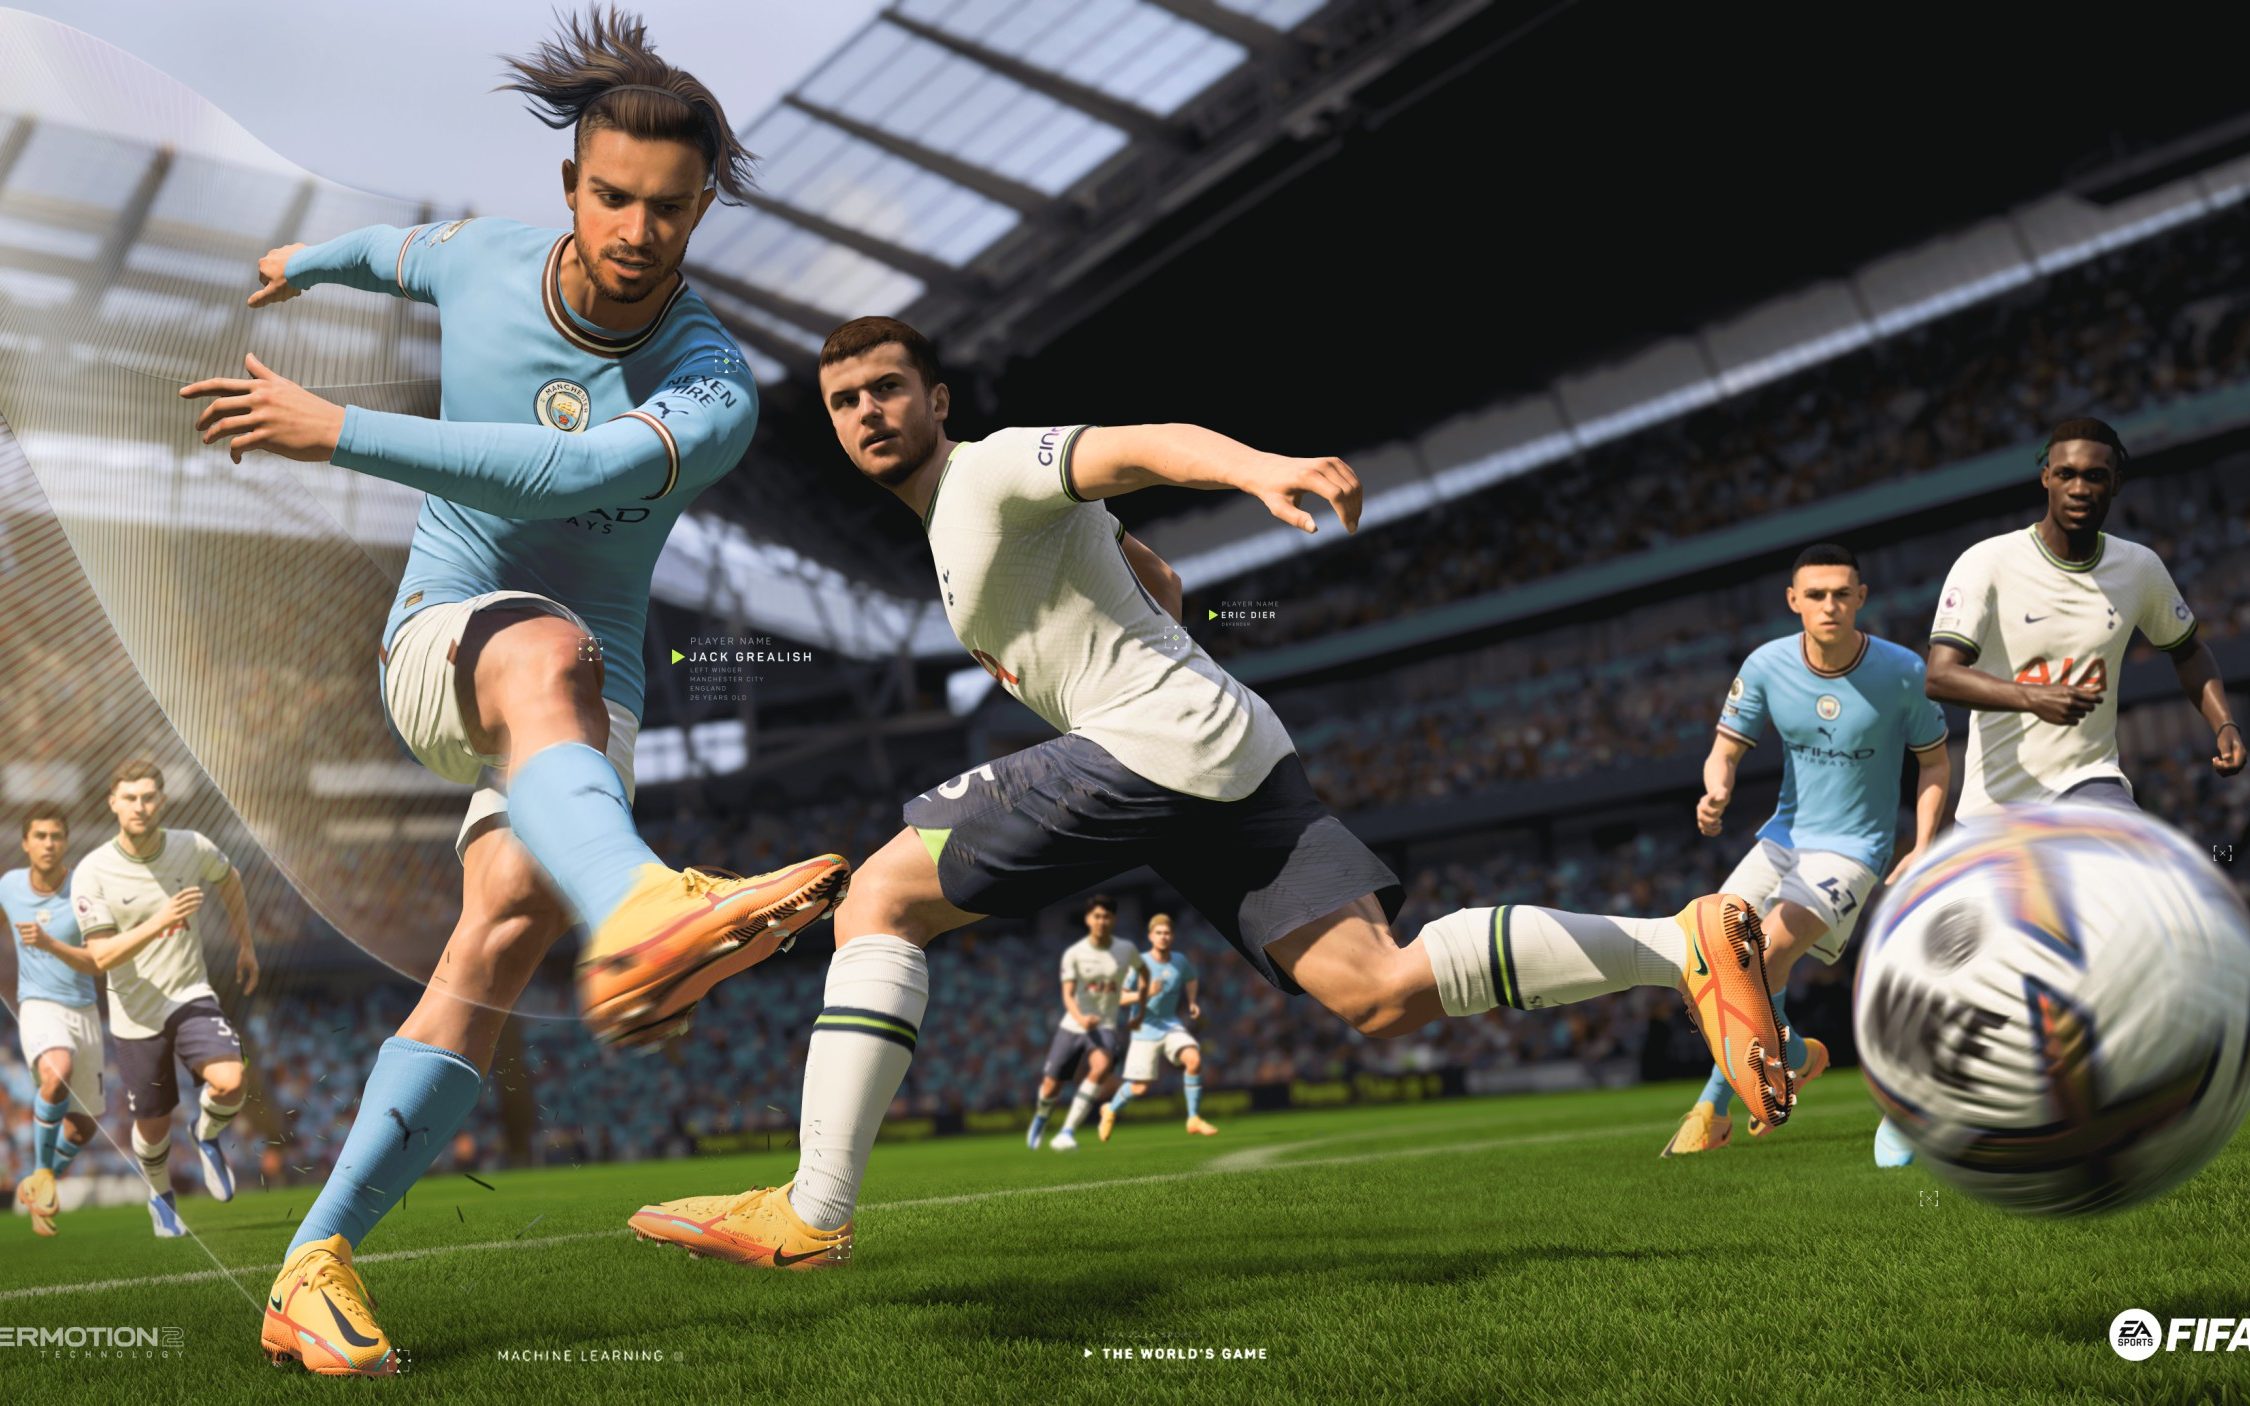 FIFA and EA Sports are divided: what are the prospects for the future of football games?